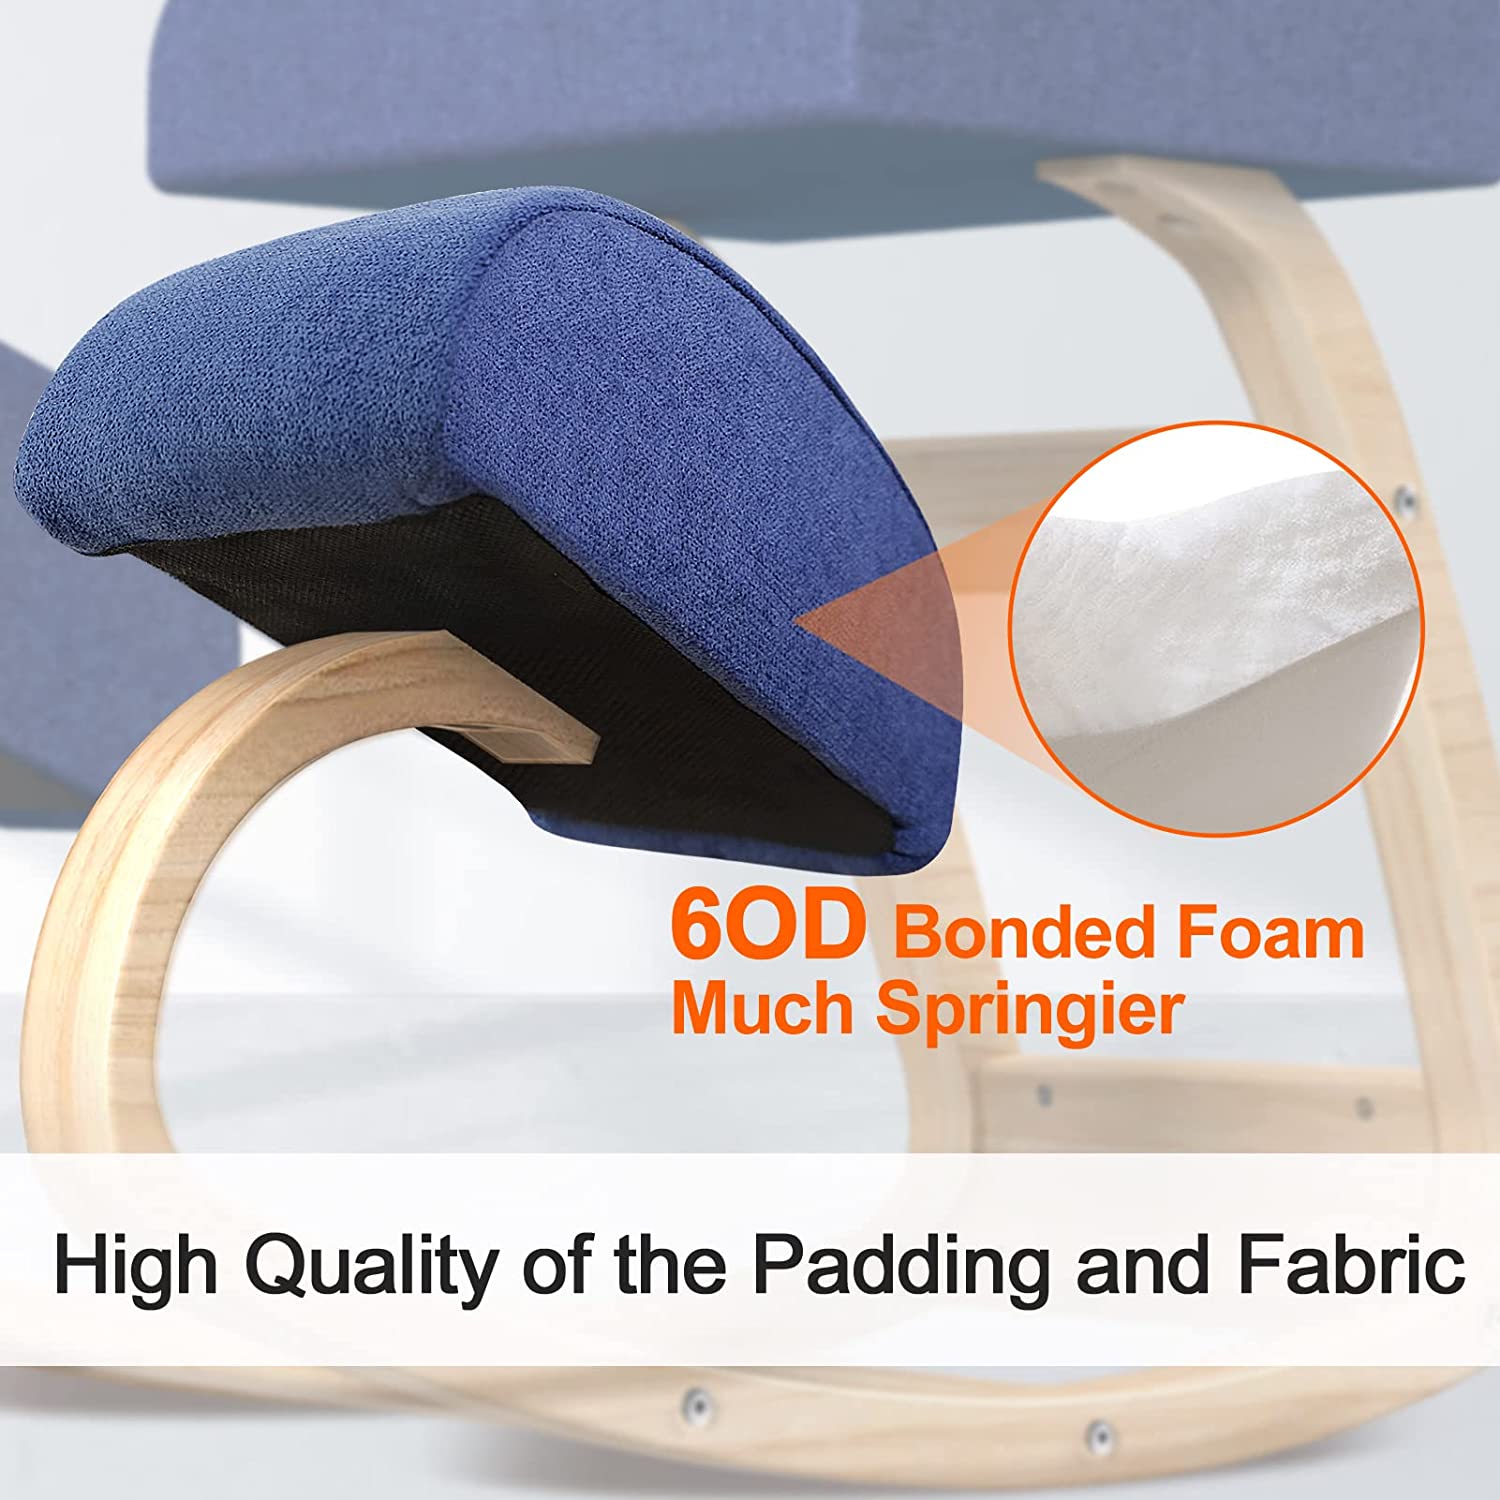 Knee chair made of high quality materials Blue